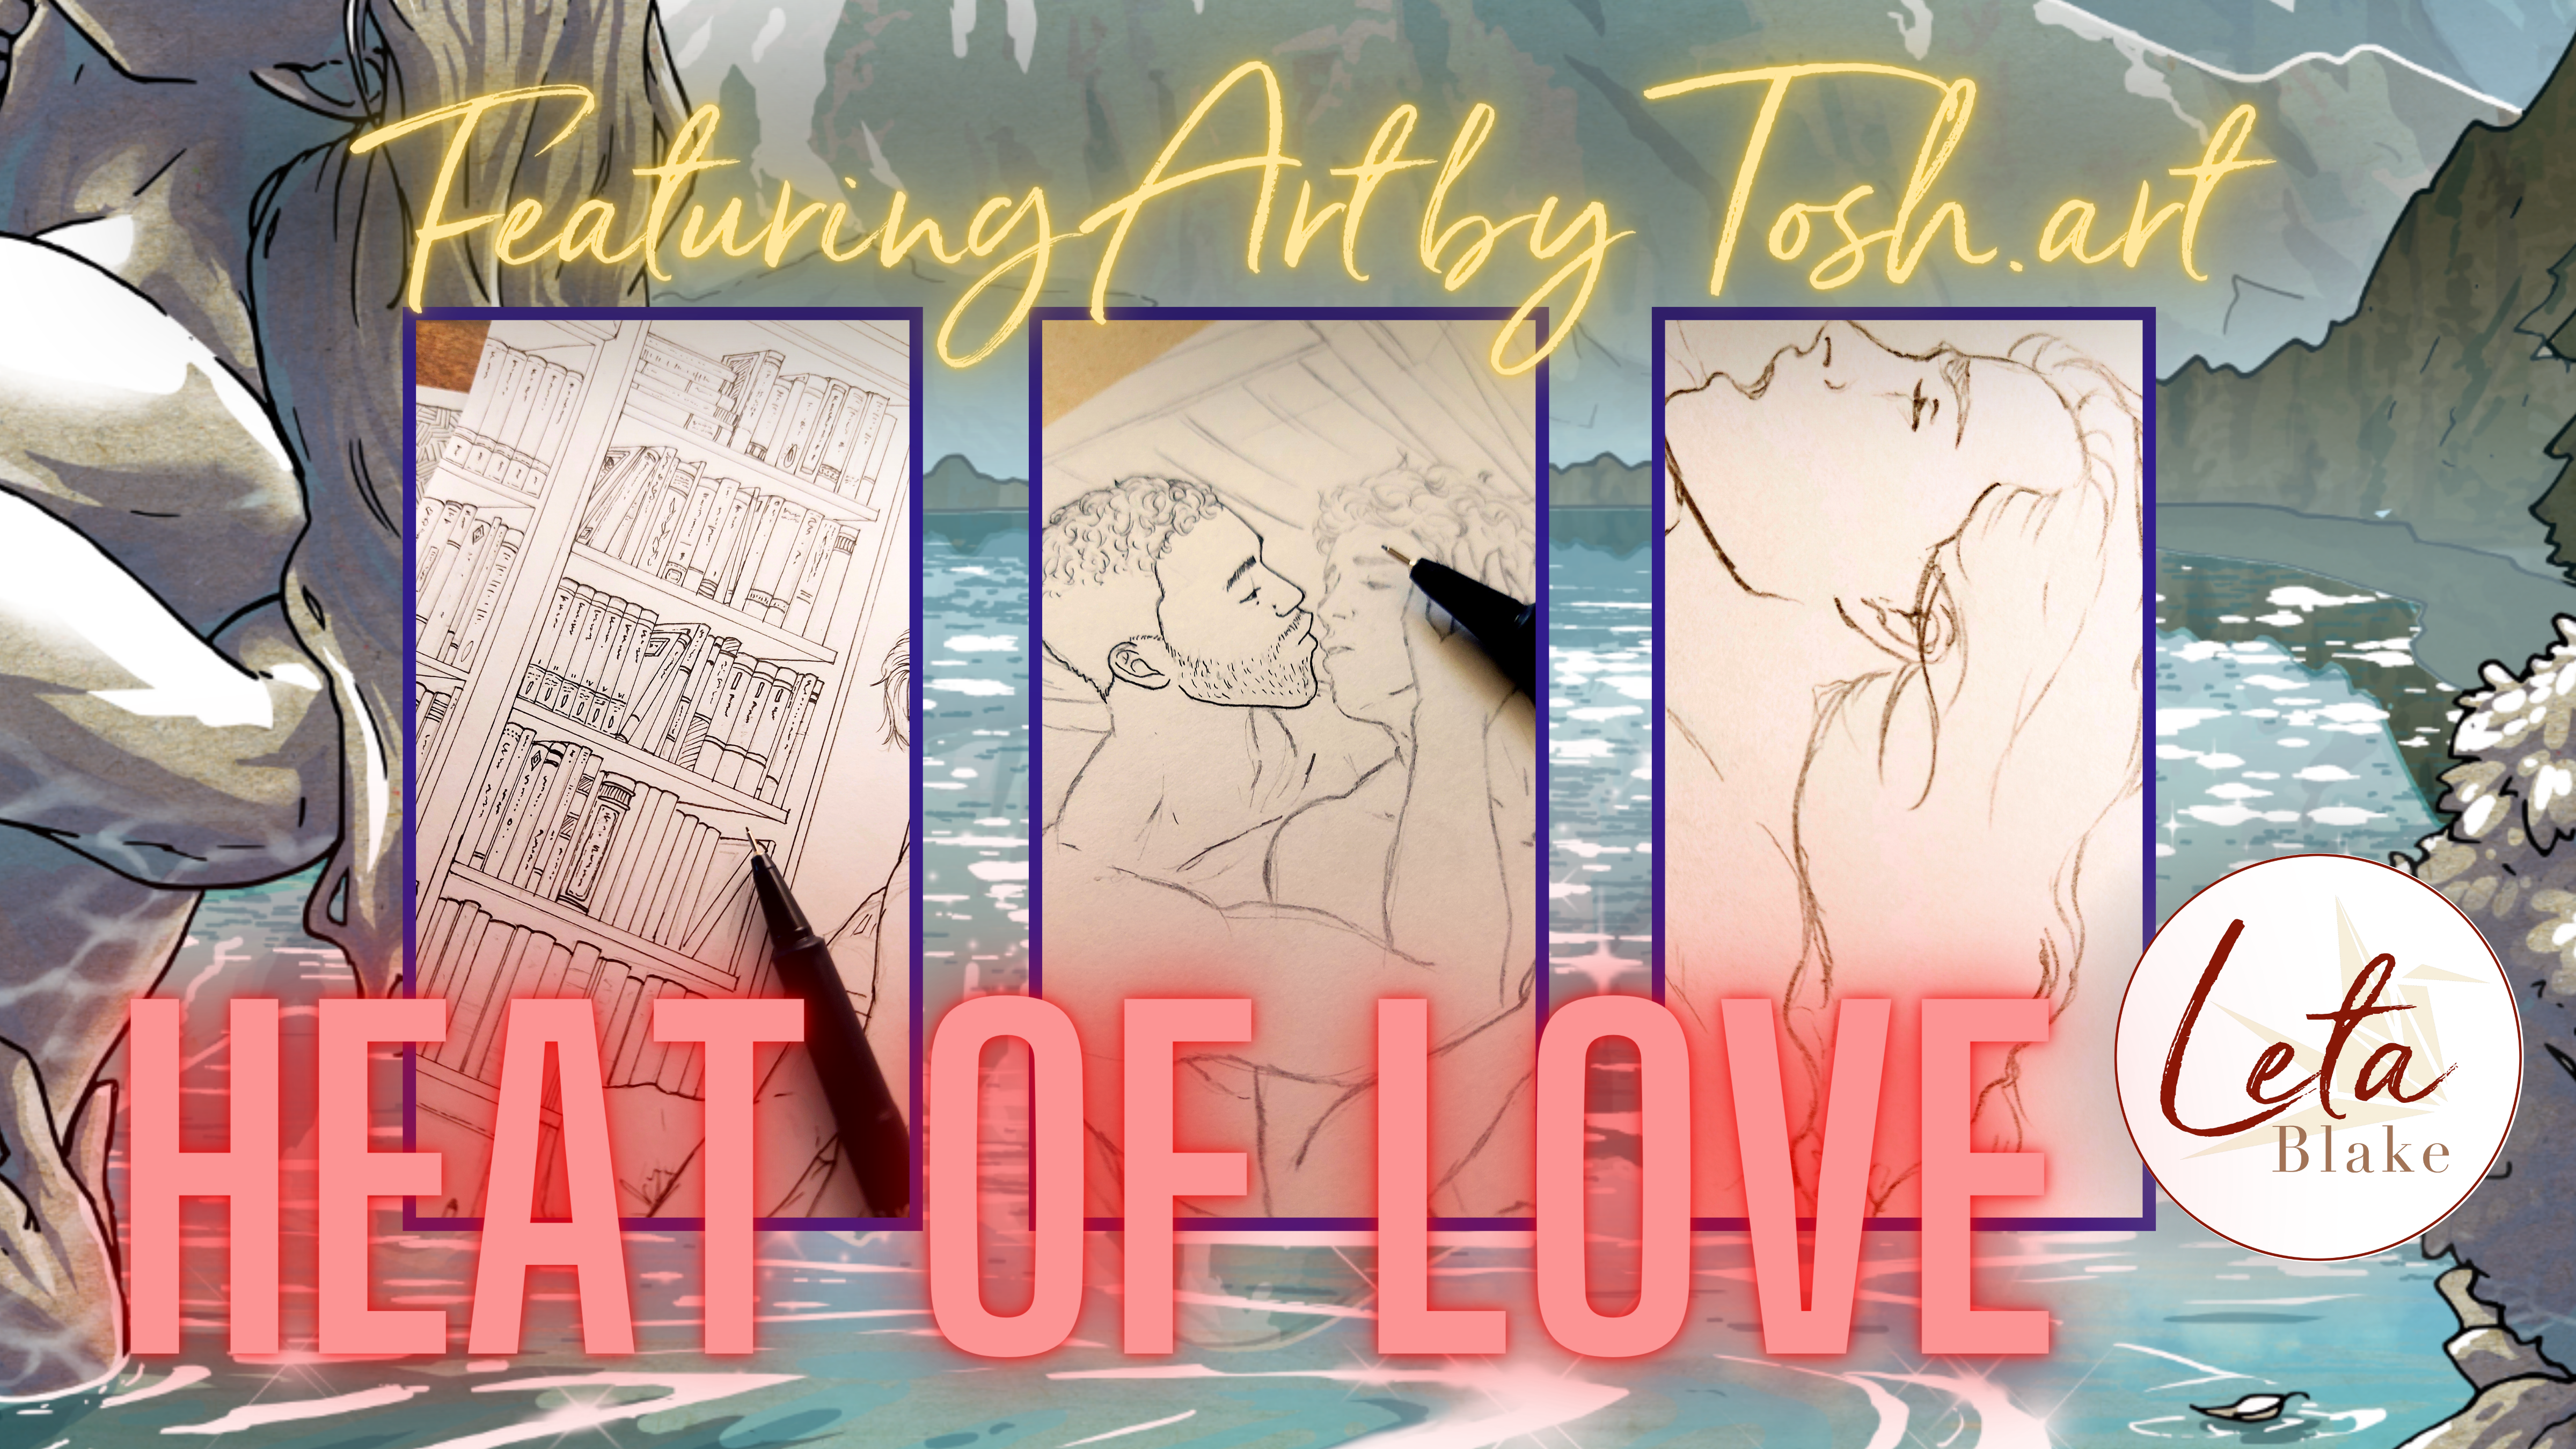 Image is three rectangles showing samples of unfinished drawings on a background of another partially colored drawing. From left to right, the rectangles show: a partial bookcase, a male couple leaning together for a kiss, and the head of a man, his face tilted up and his long hair flowing down his back. The background image shows a body of water sparkling in sunlight. Image text reads: "Featuring Art by Tosh.art" and "Heat of Love".